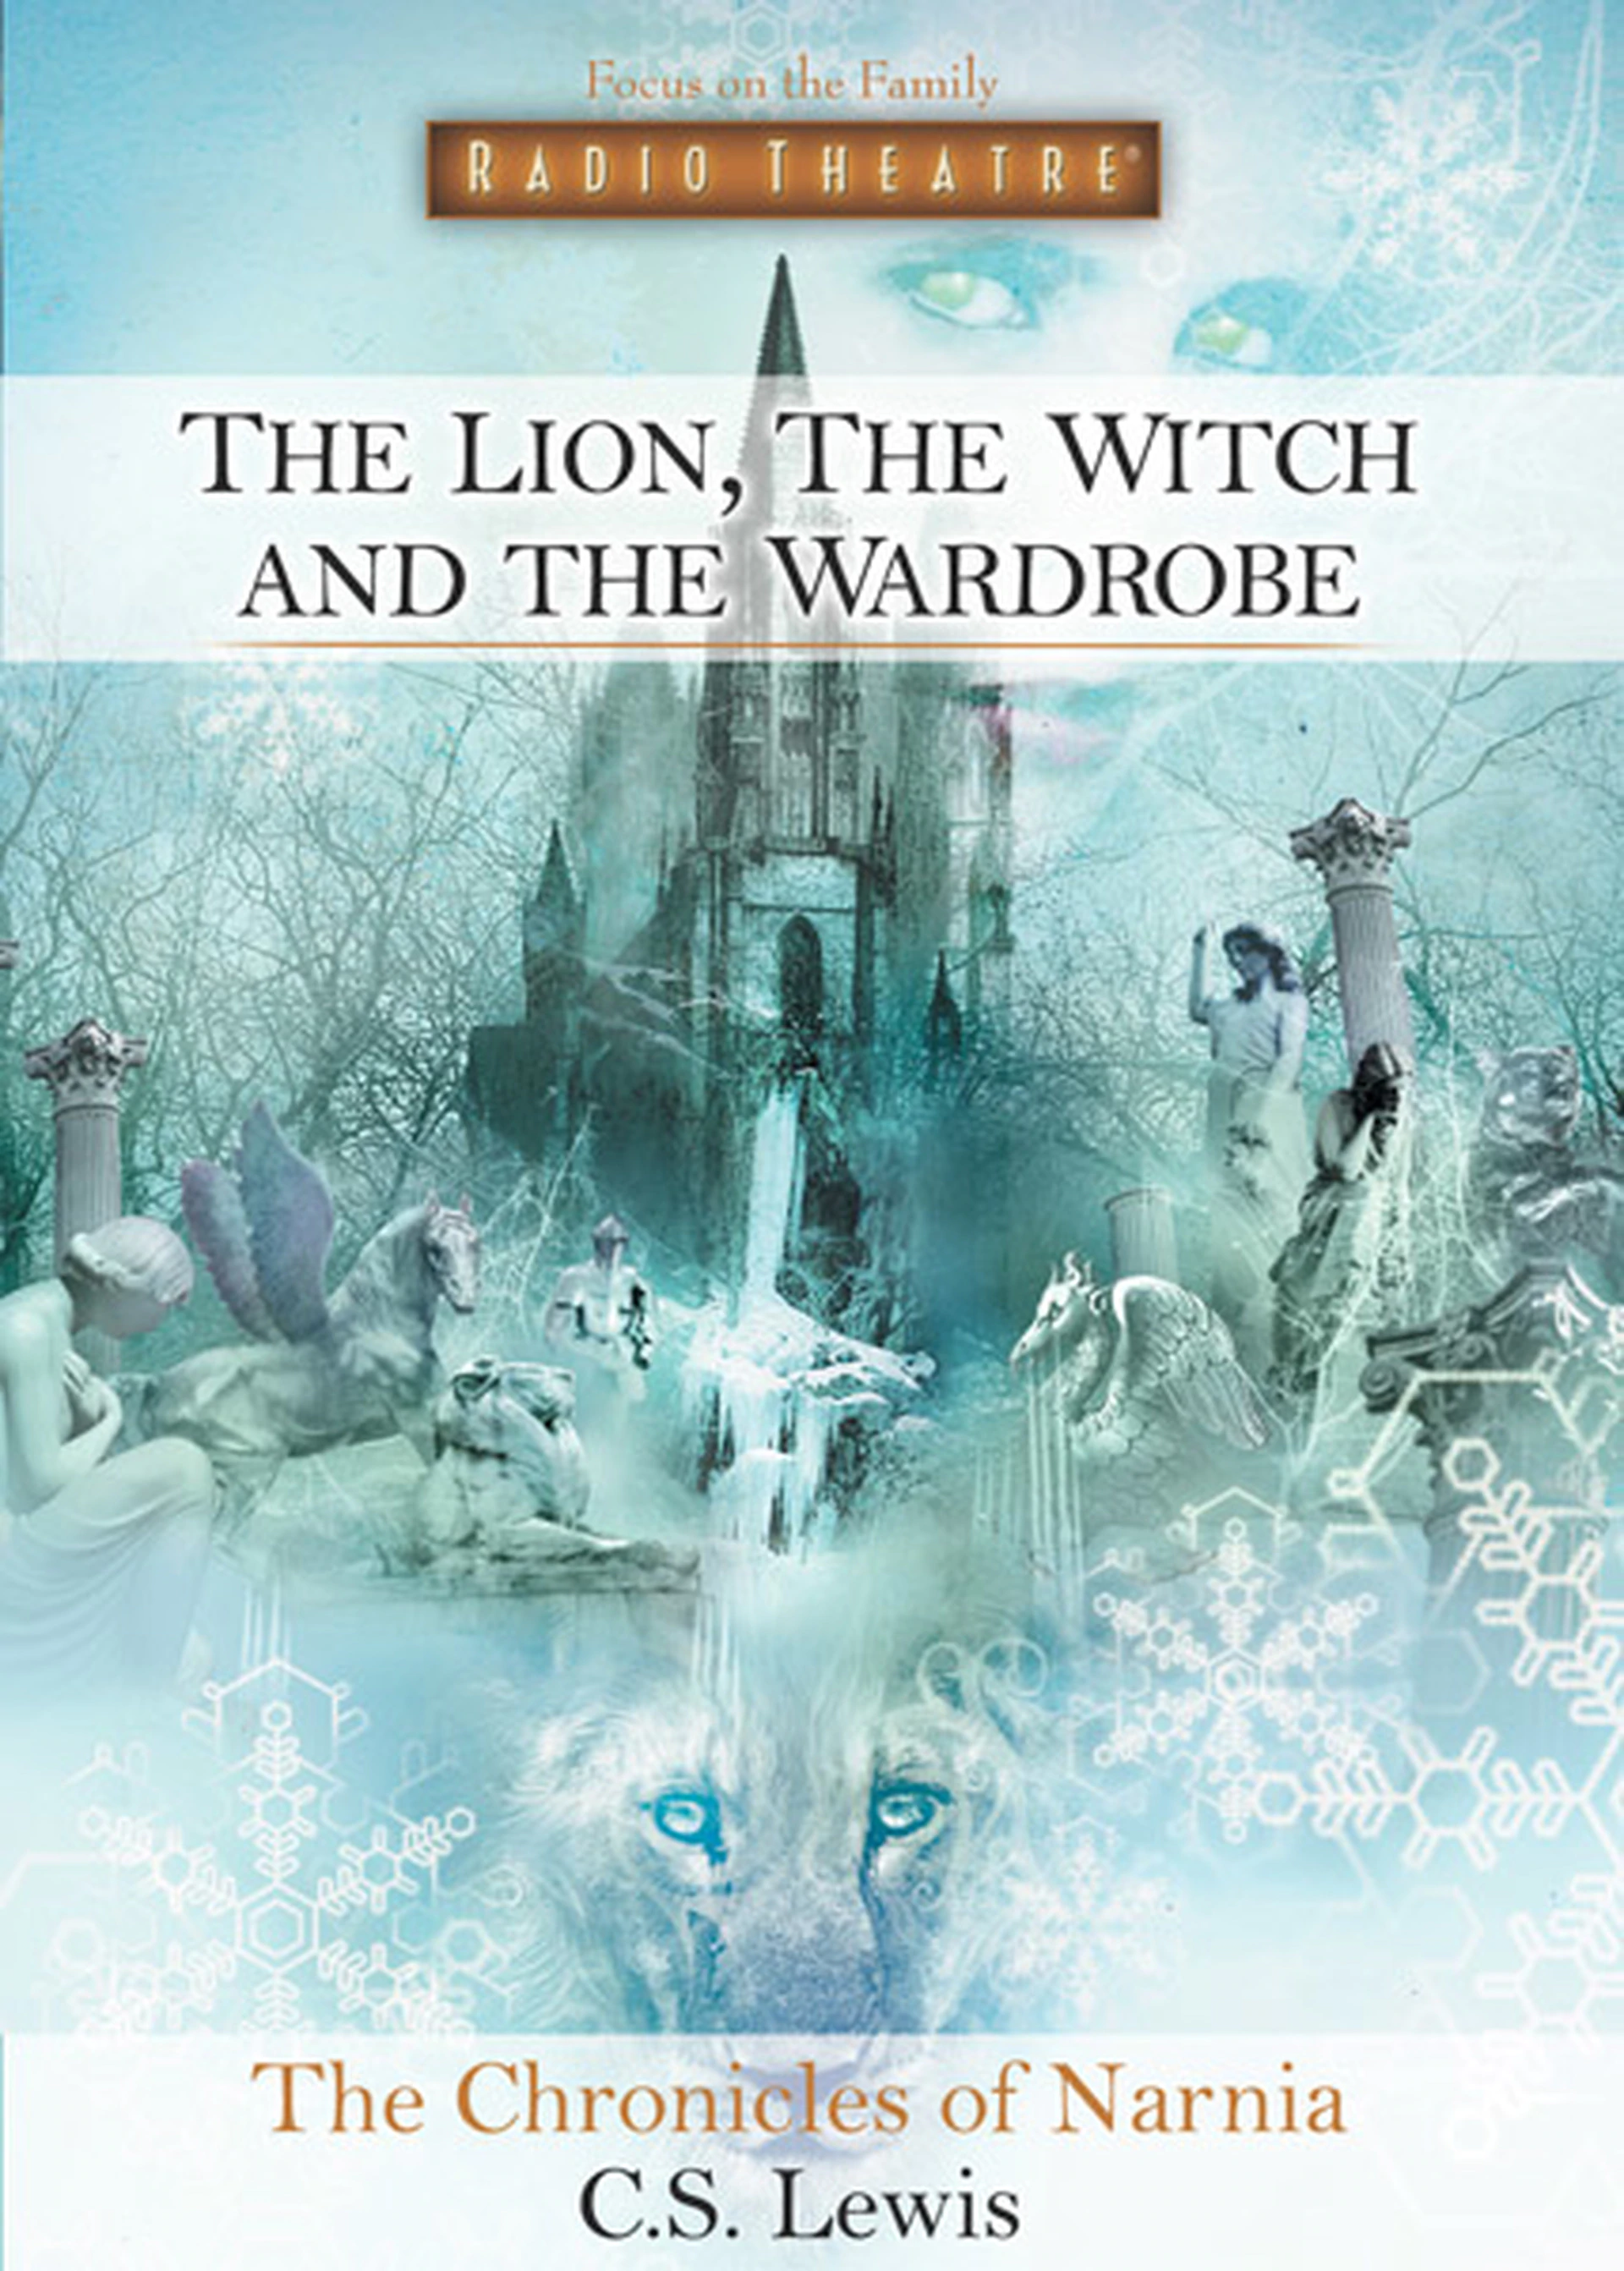 the lion the witch and the wardrobe audiobook torrent